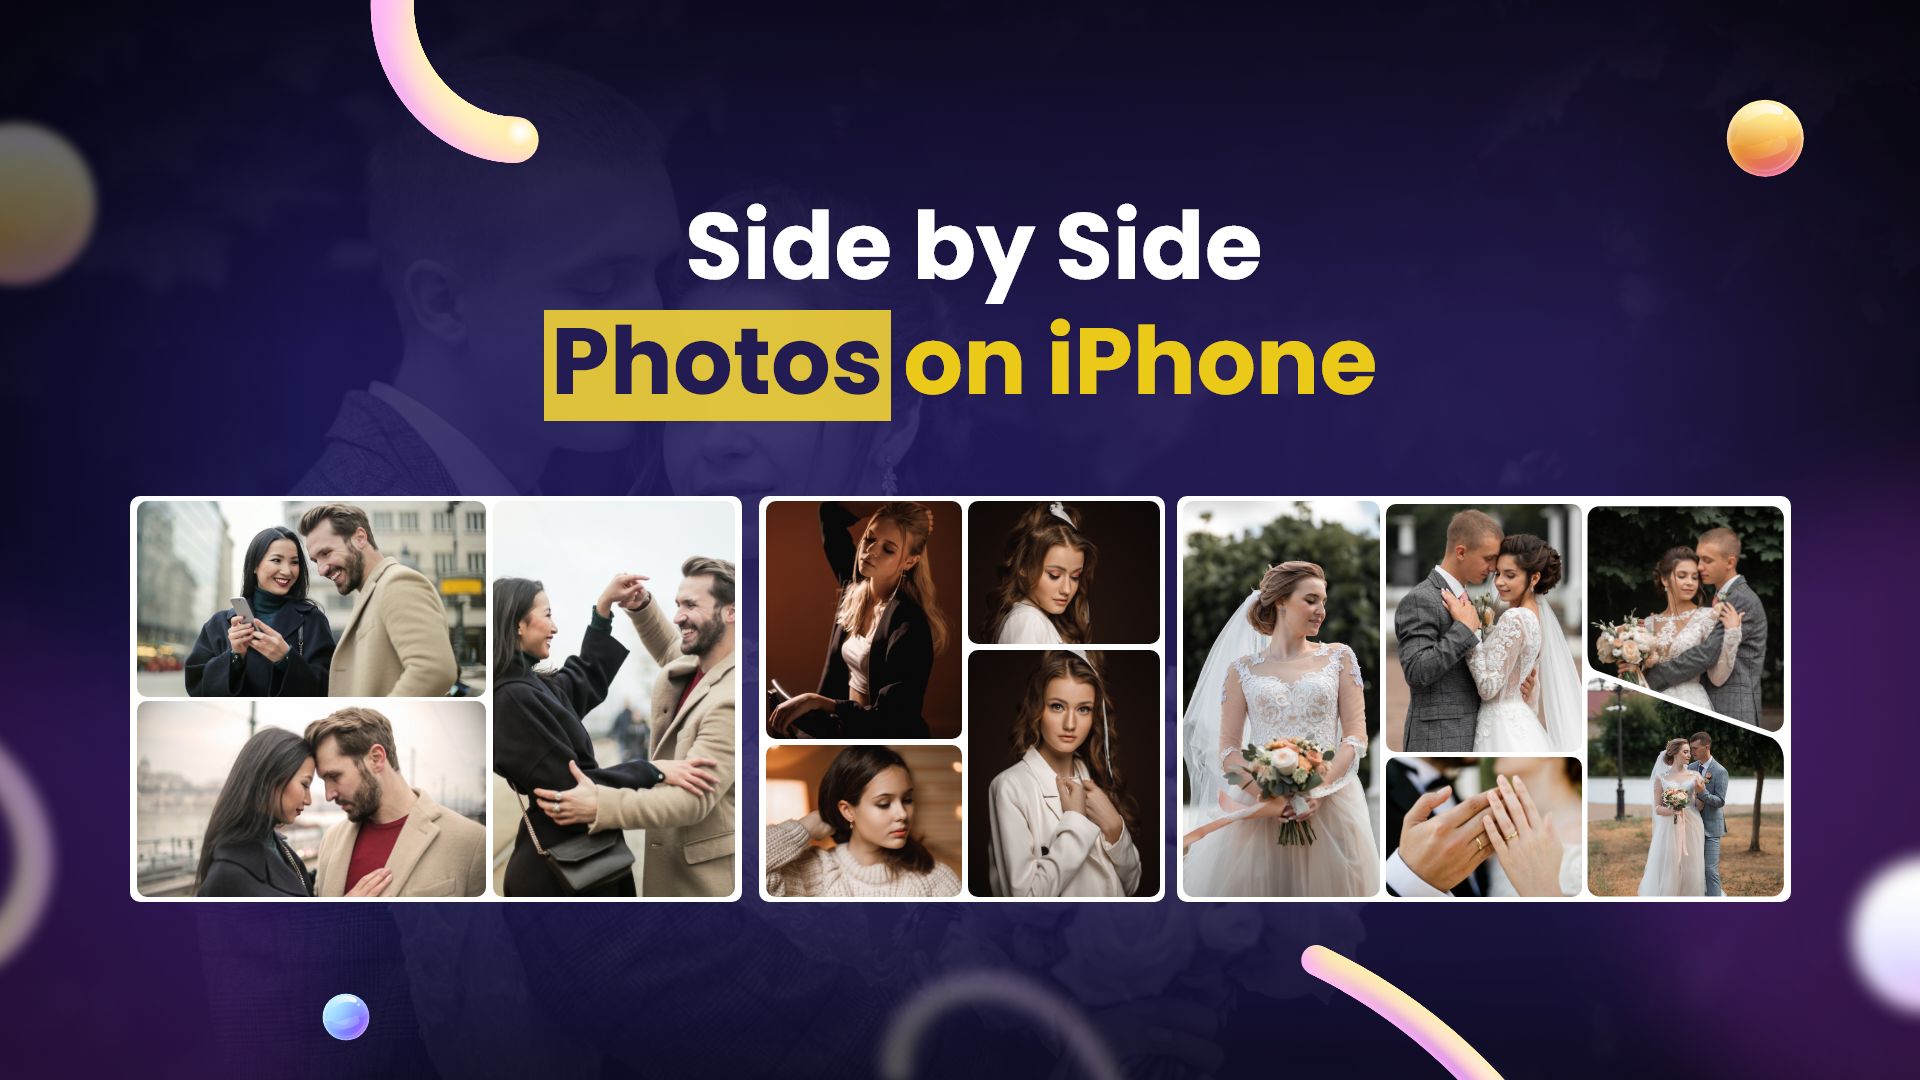 How To Do Side By Side Photos On Iphone